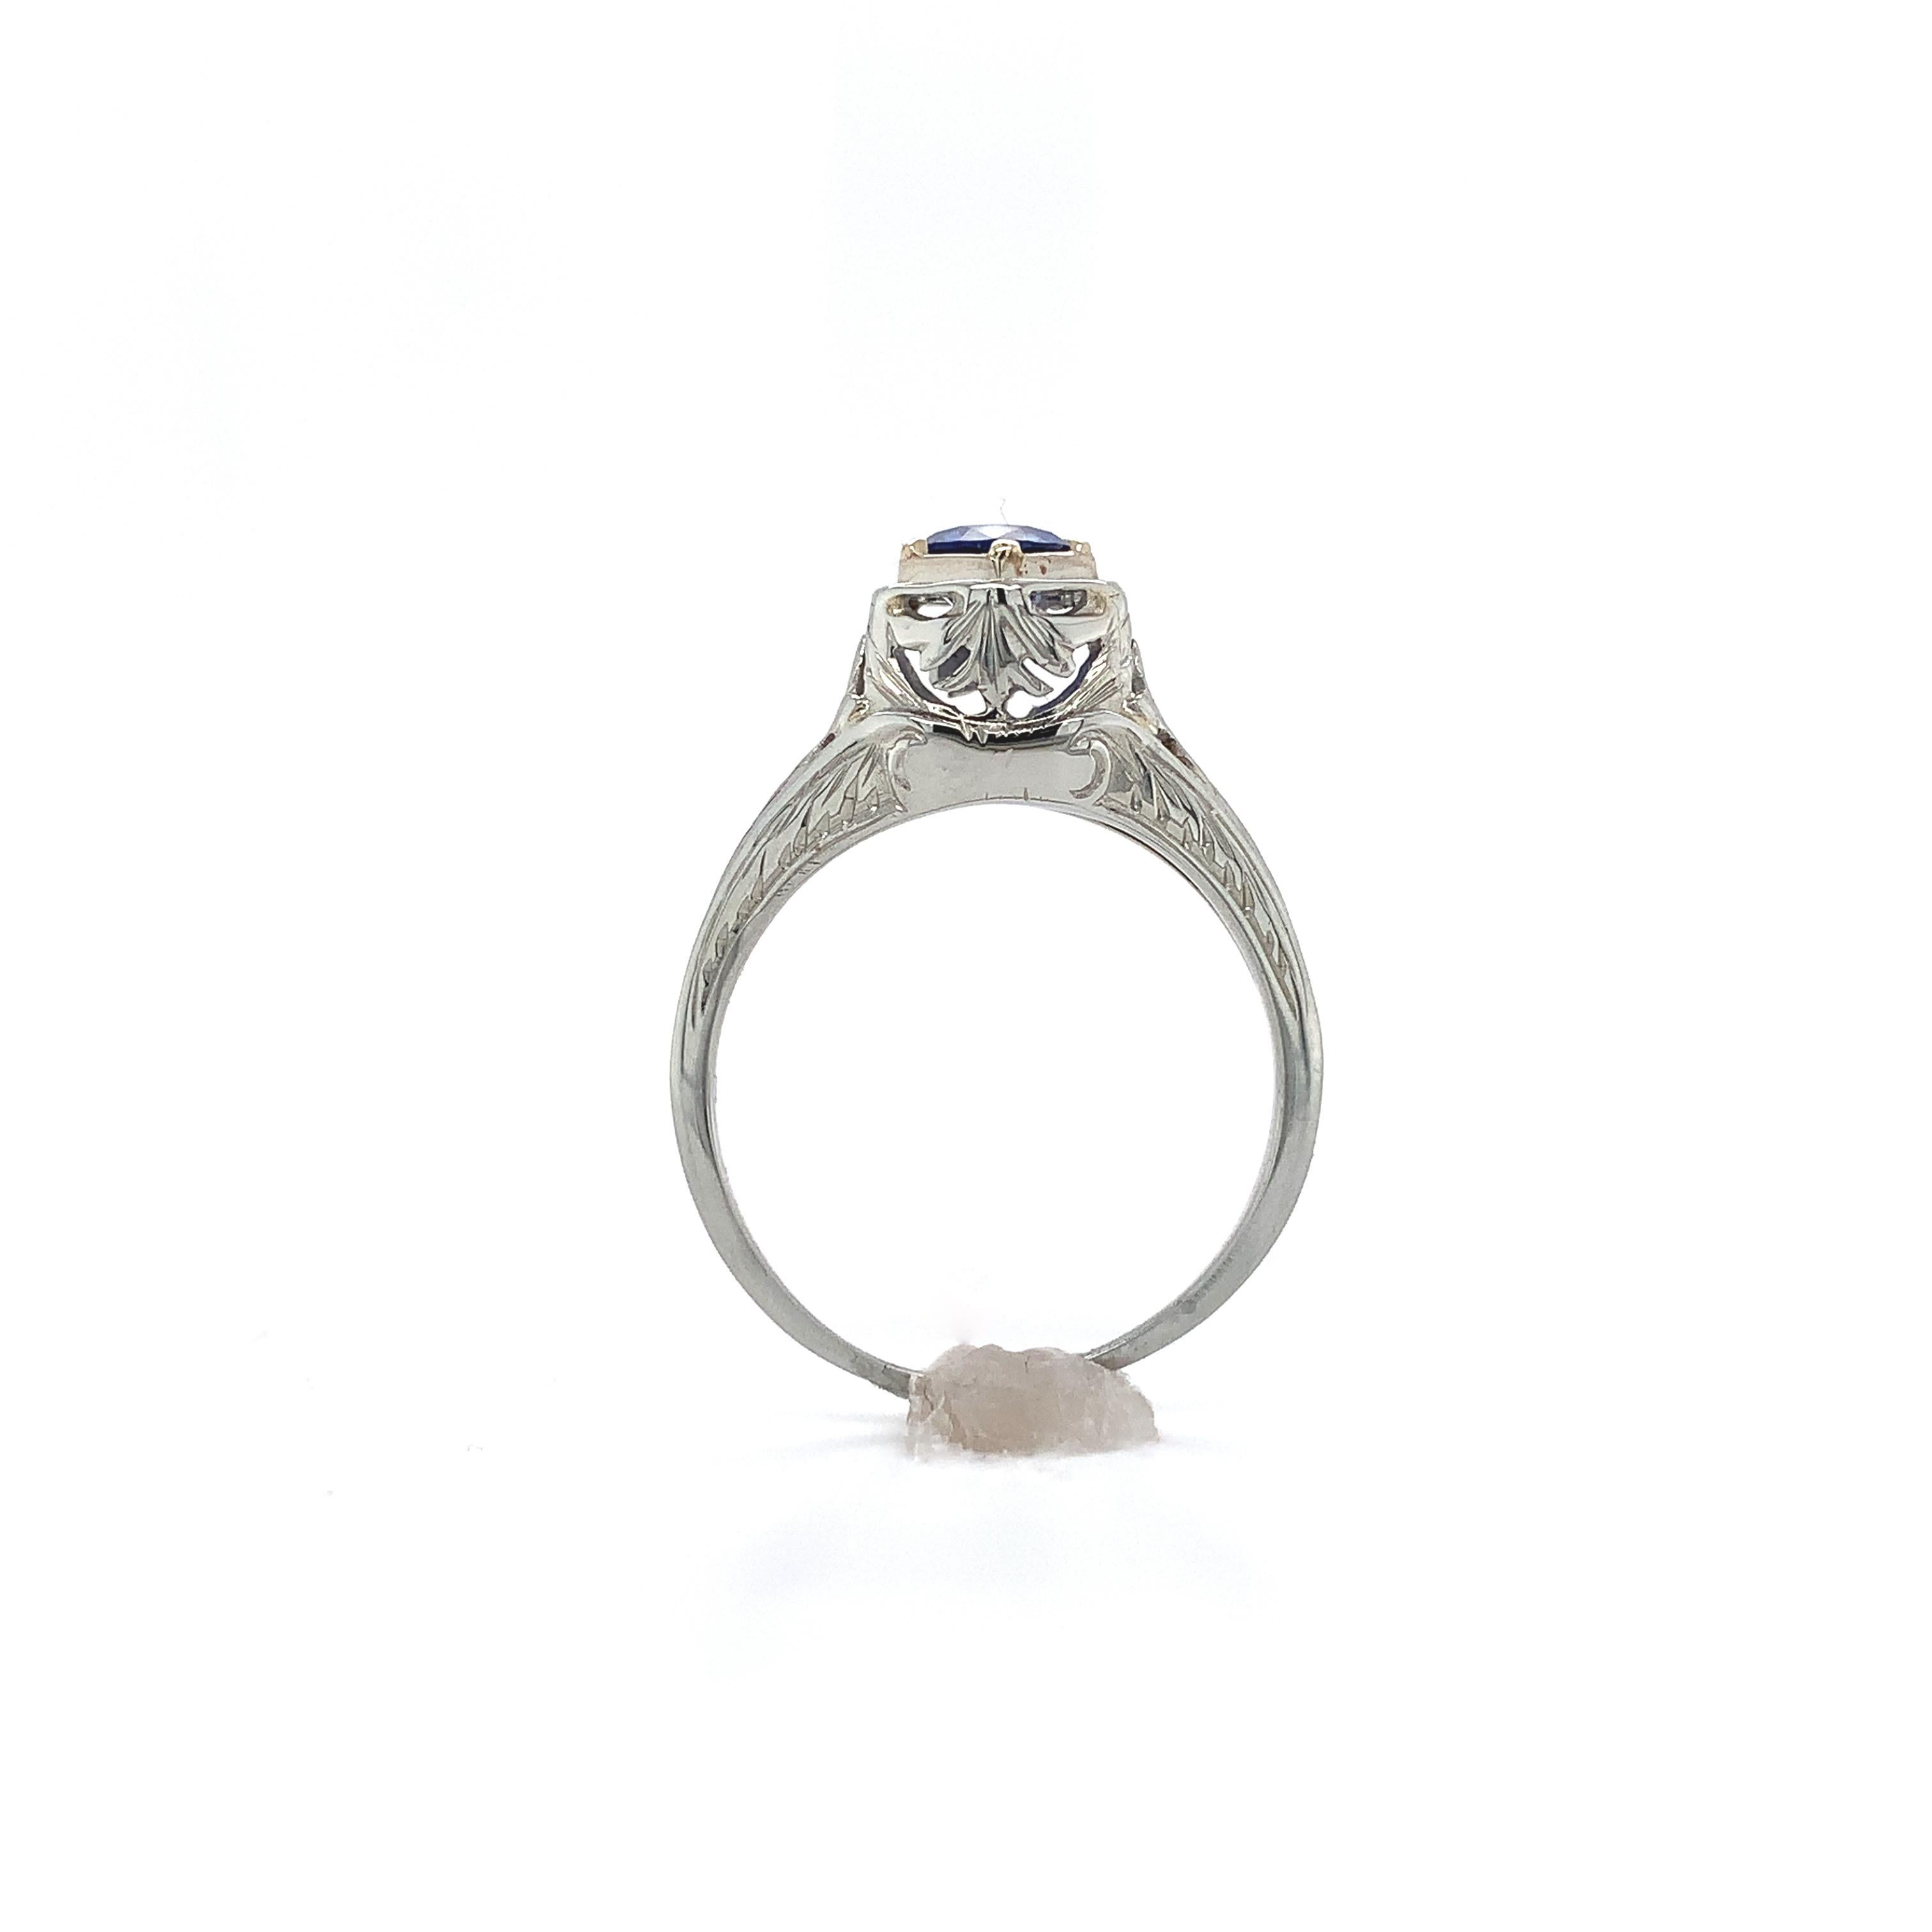 Art Deco 18K white gold filigree ring featuring a round genuine blue sapphire weighing .63cts. The sapphire has lighter cornflower blue with a little lavender color and measures about 5mm.  There is hand engraved detail and also a plain area where